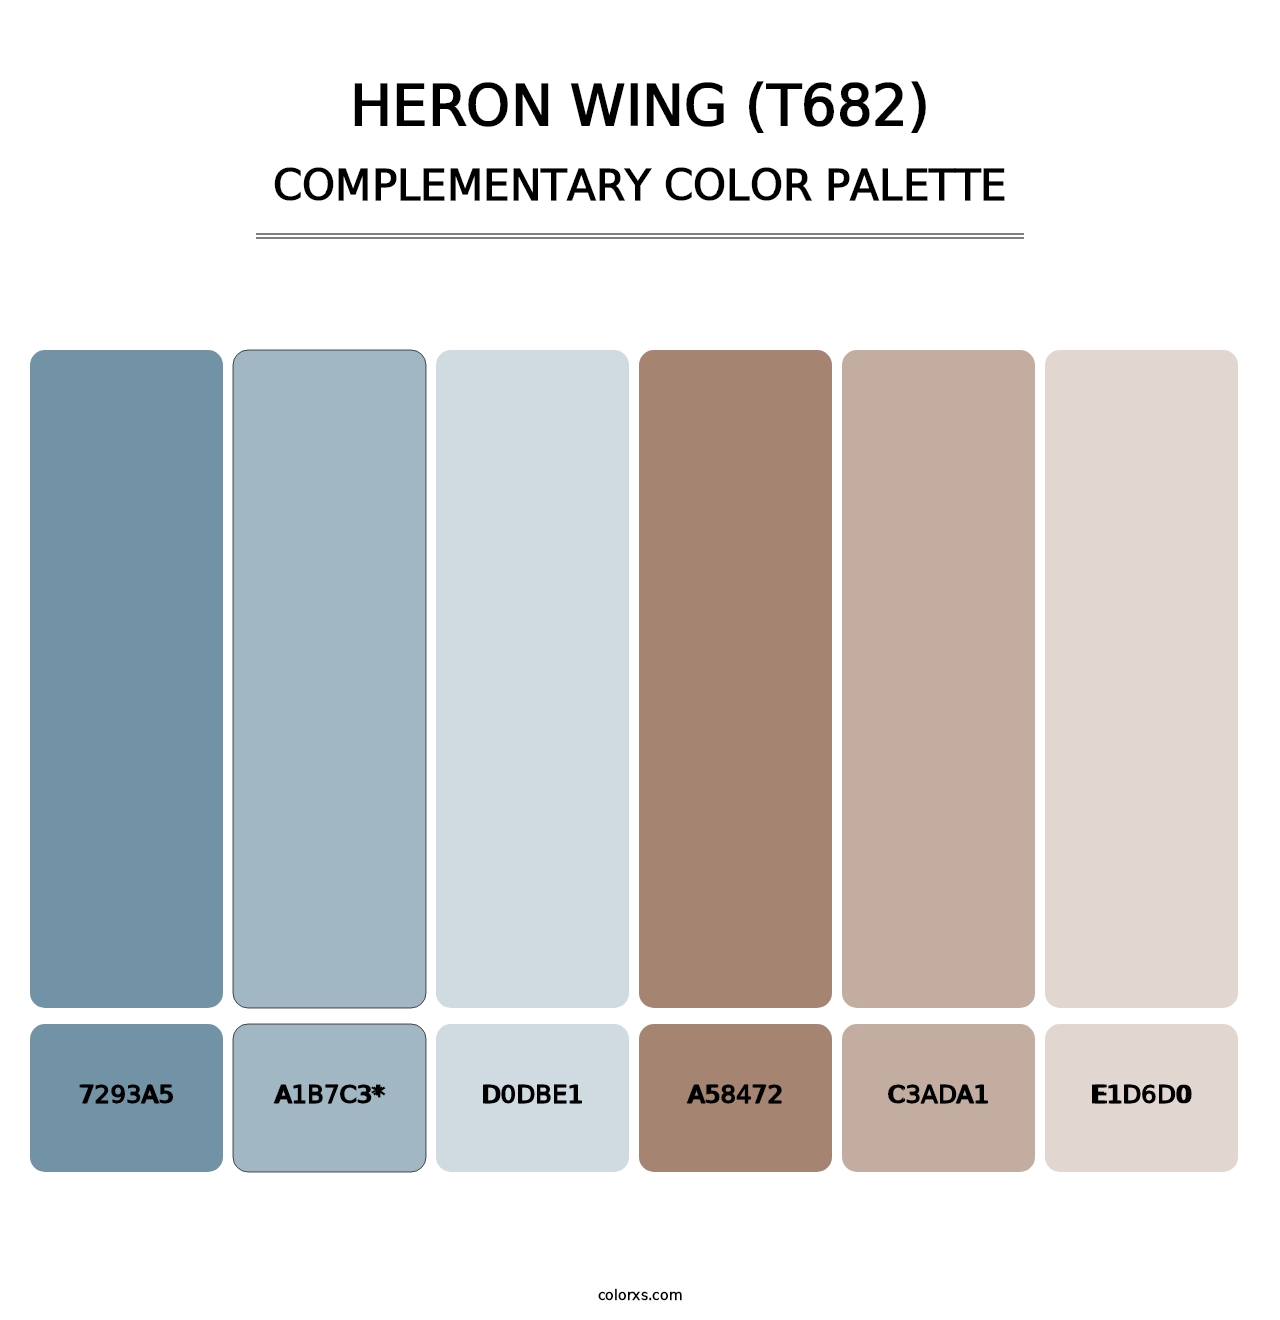 Heron Wing (T682) - Complementary Color Palette